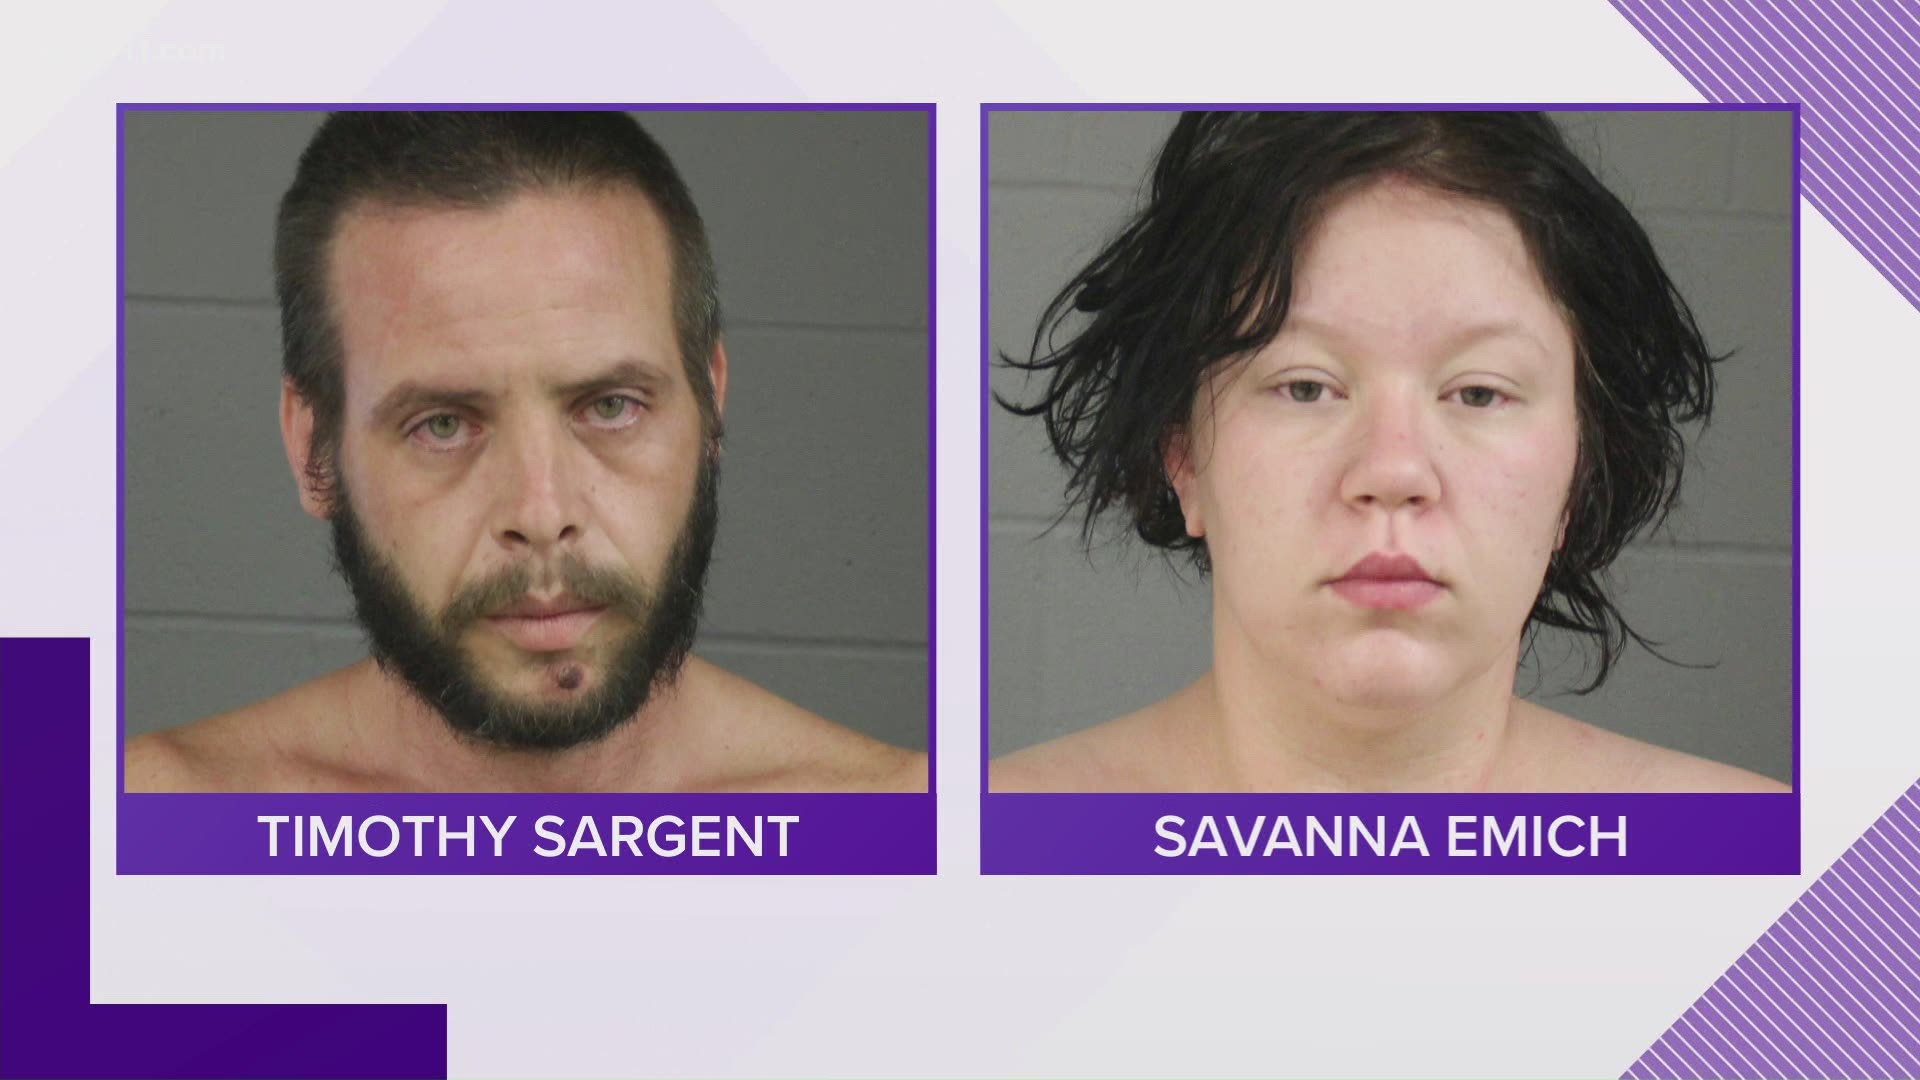 Police in South Dakota have arrested a man and a woman  wanted for questioning in a Southern Indiana shooting last week.